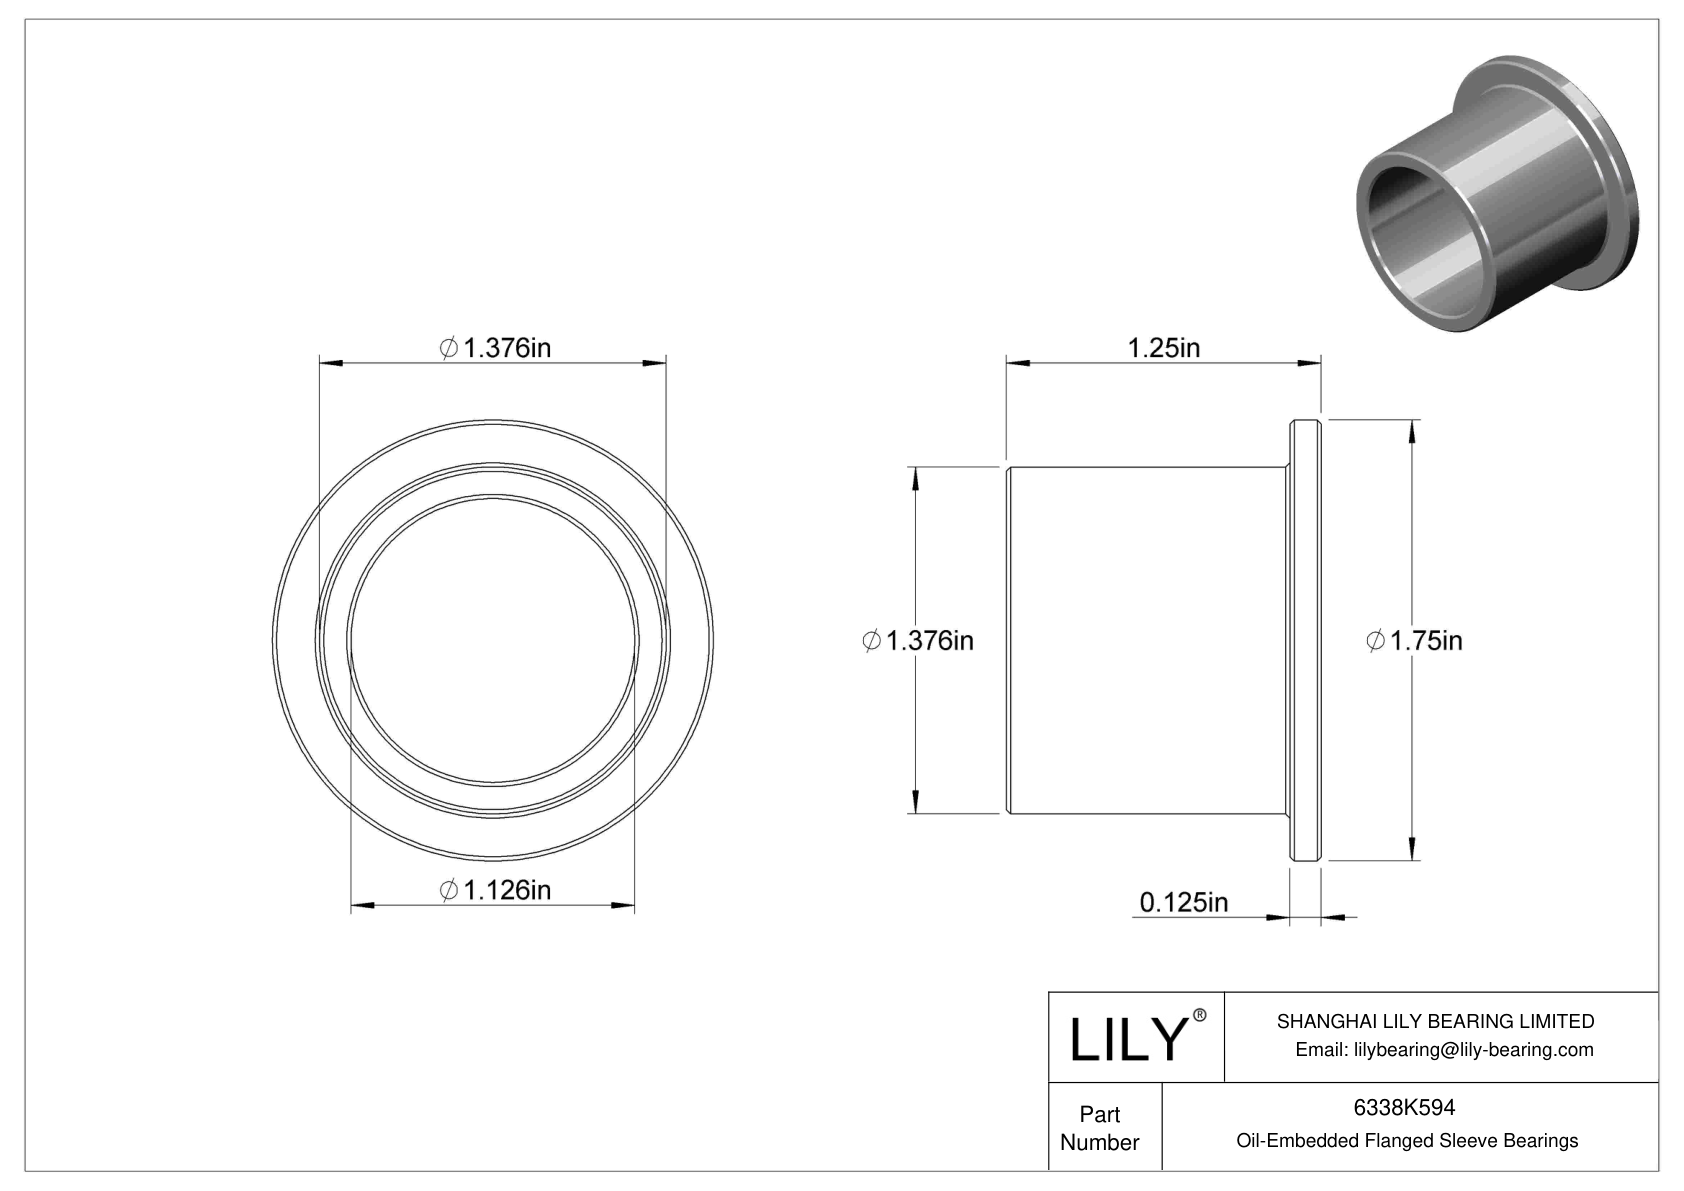 GDDIKFJE Oil-Embedded Flanged Sleeve Bearings cad drawing